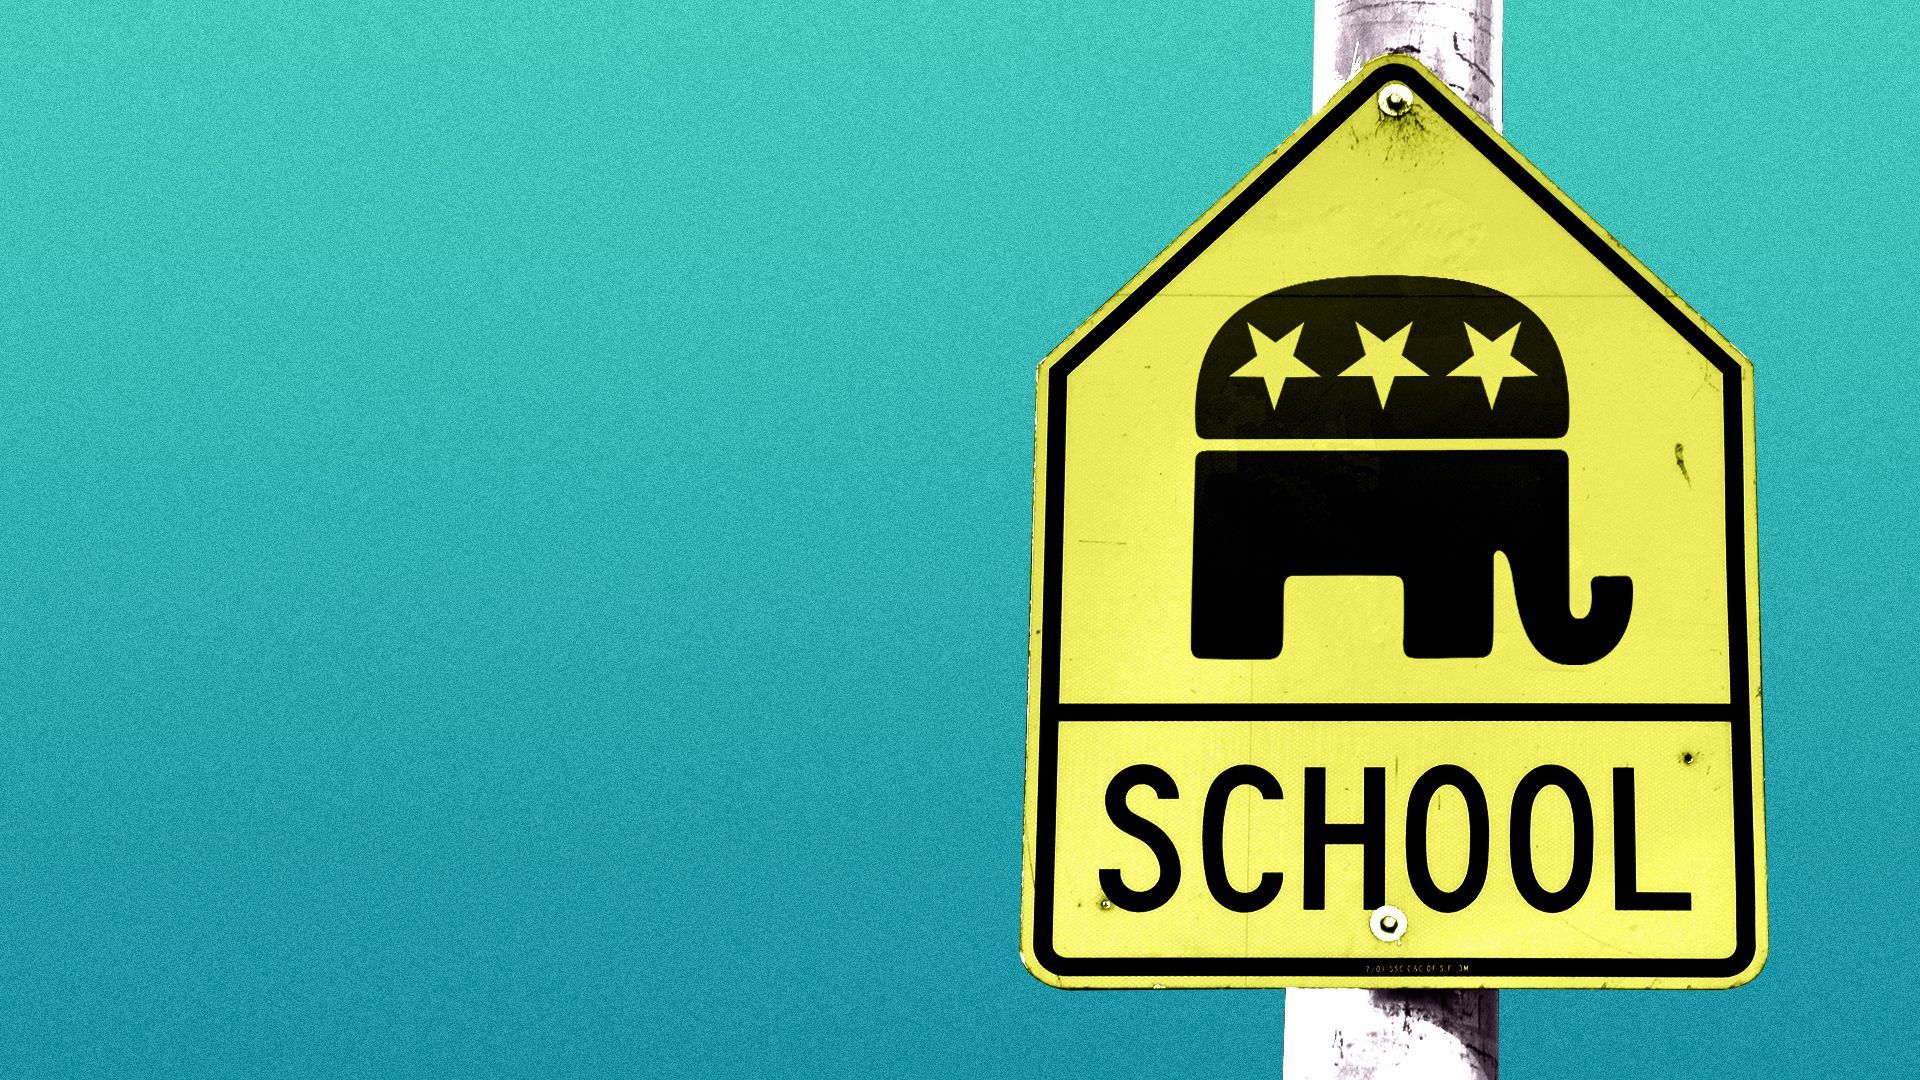 Illustration of a school street sign with the Republican Party logo on instead of icons of children.